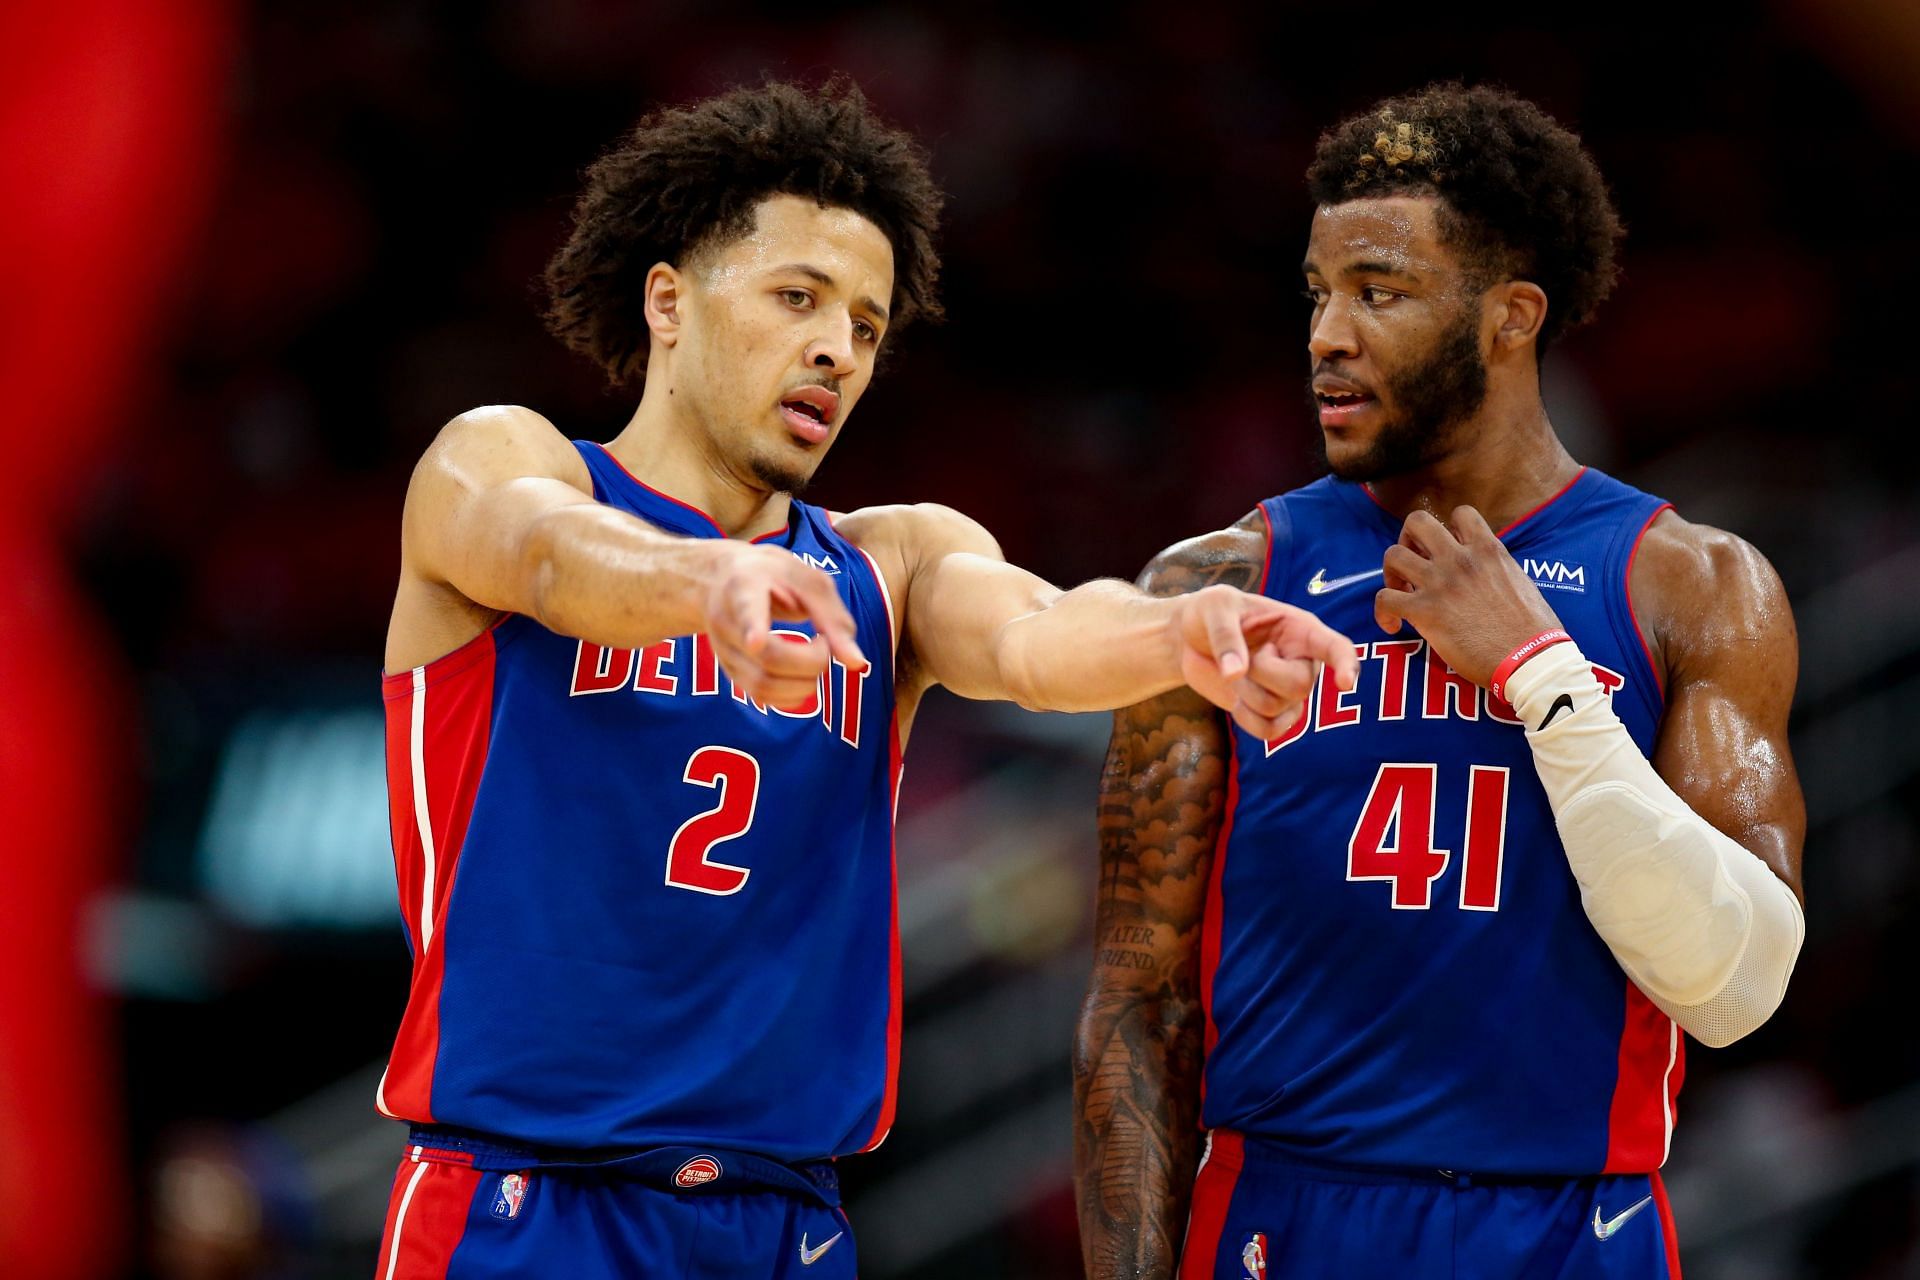 The Detroit Pistons finally secured their second win of the season on Wednesday against the Houston Rockets